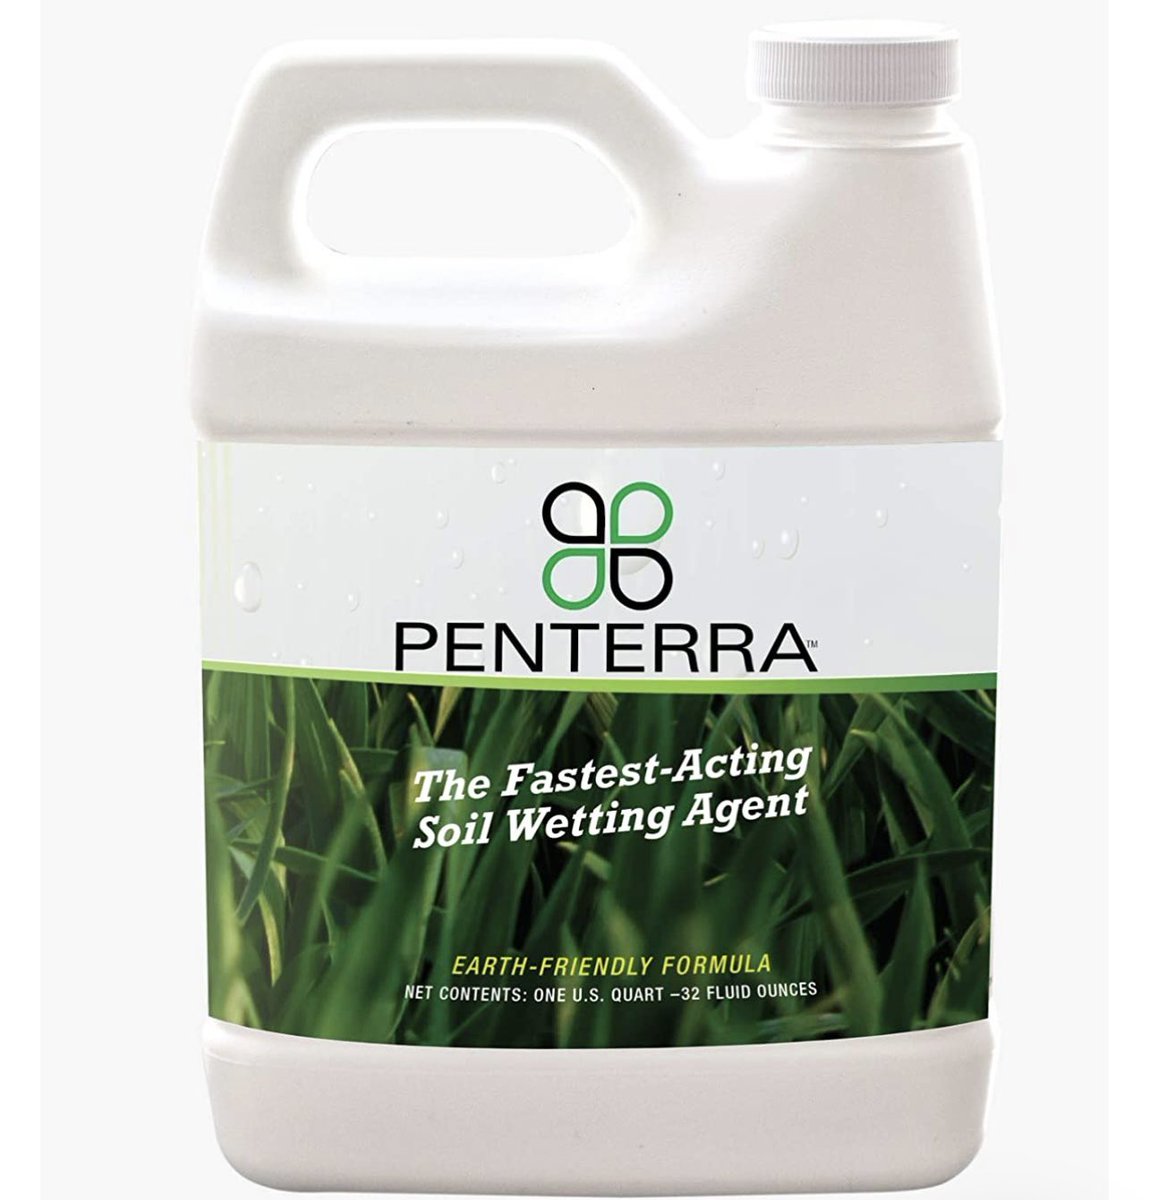 🚨 Attention Lawn Enthusiasts 🚨 Keep your lawn and turfgrass healthy with Penterra SoilPenetrant.com! 💦💪 It helps penetrate water into hard soils and improves soil structure, allowing for better hydration and nutrient absorption. 🌱🌿 #LawnCare #TurfHealth 🌞🏡🌳